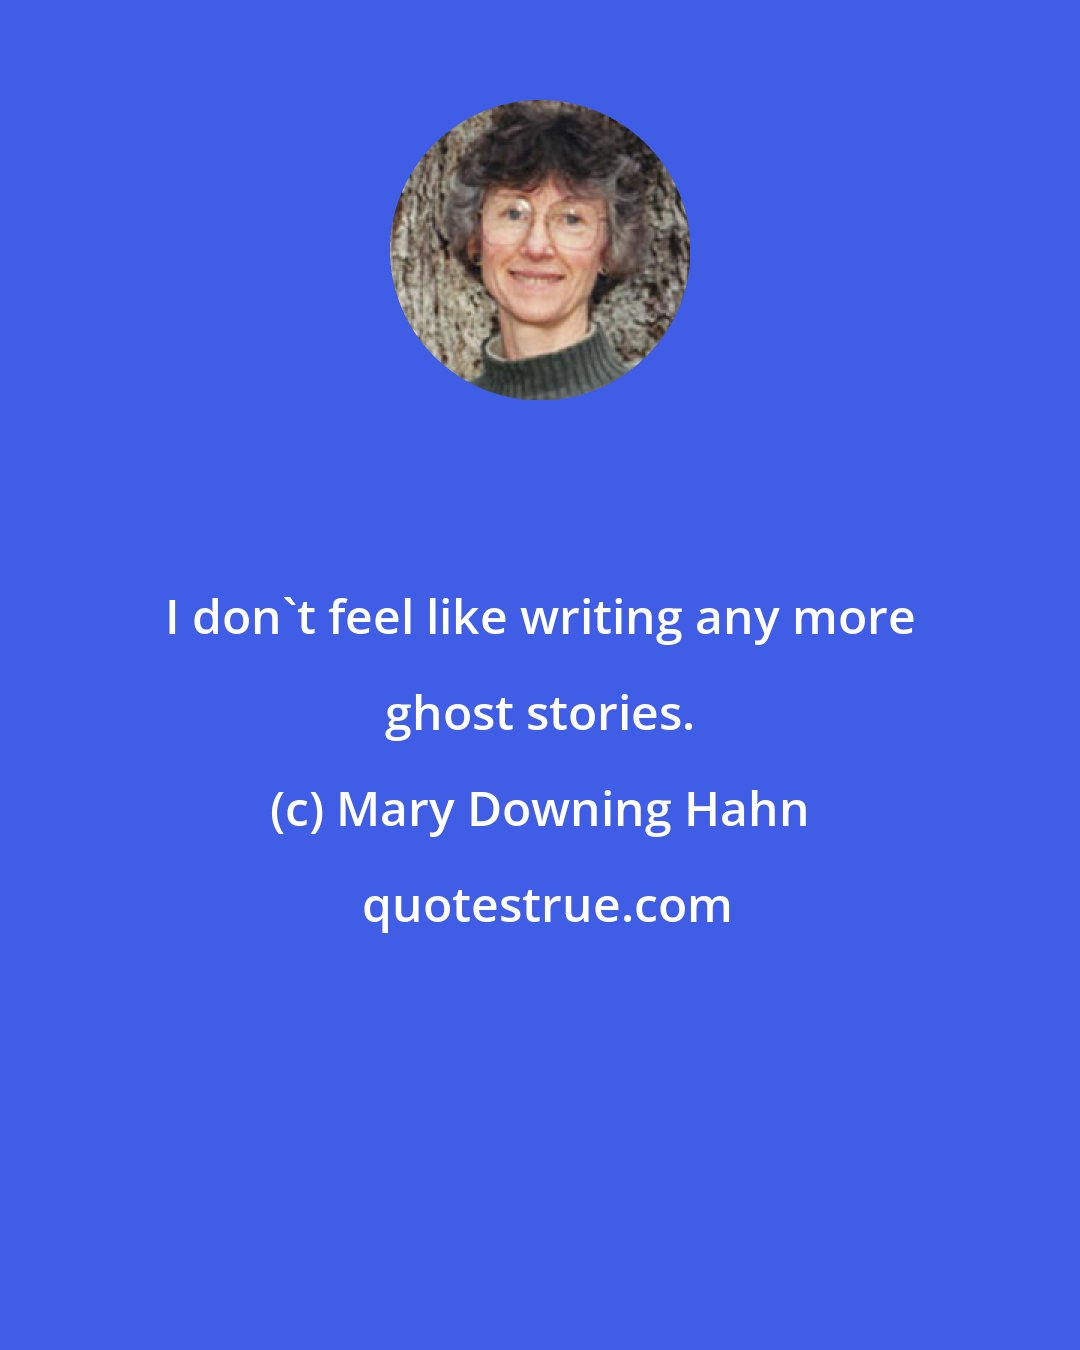 Mary Downing Hahn: I don't feel like writing any more ghost stories.